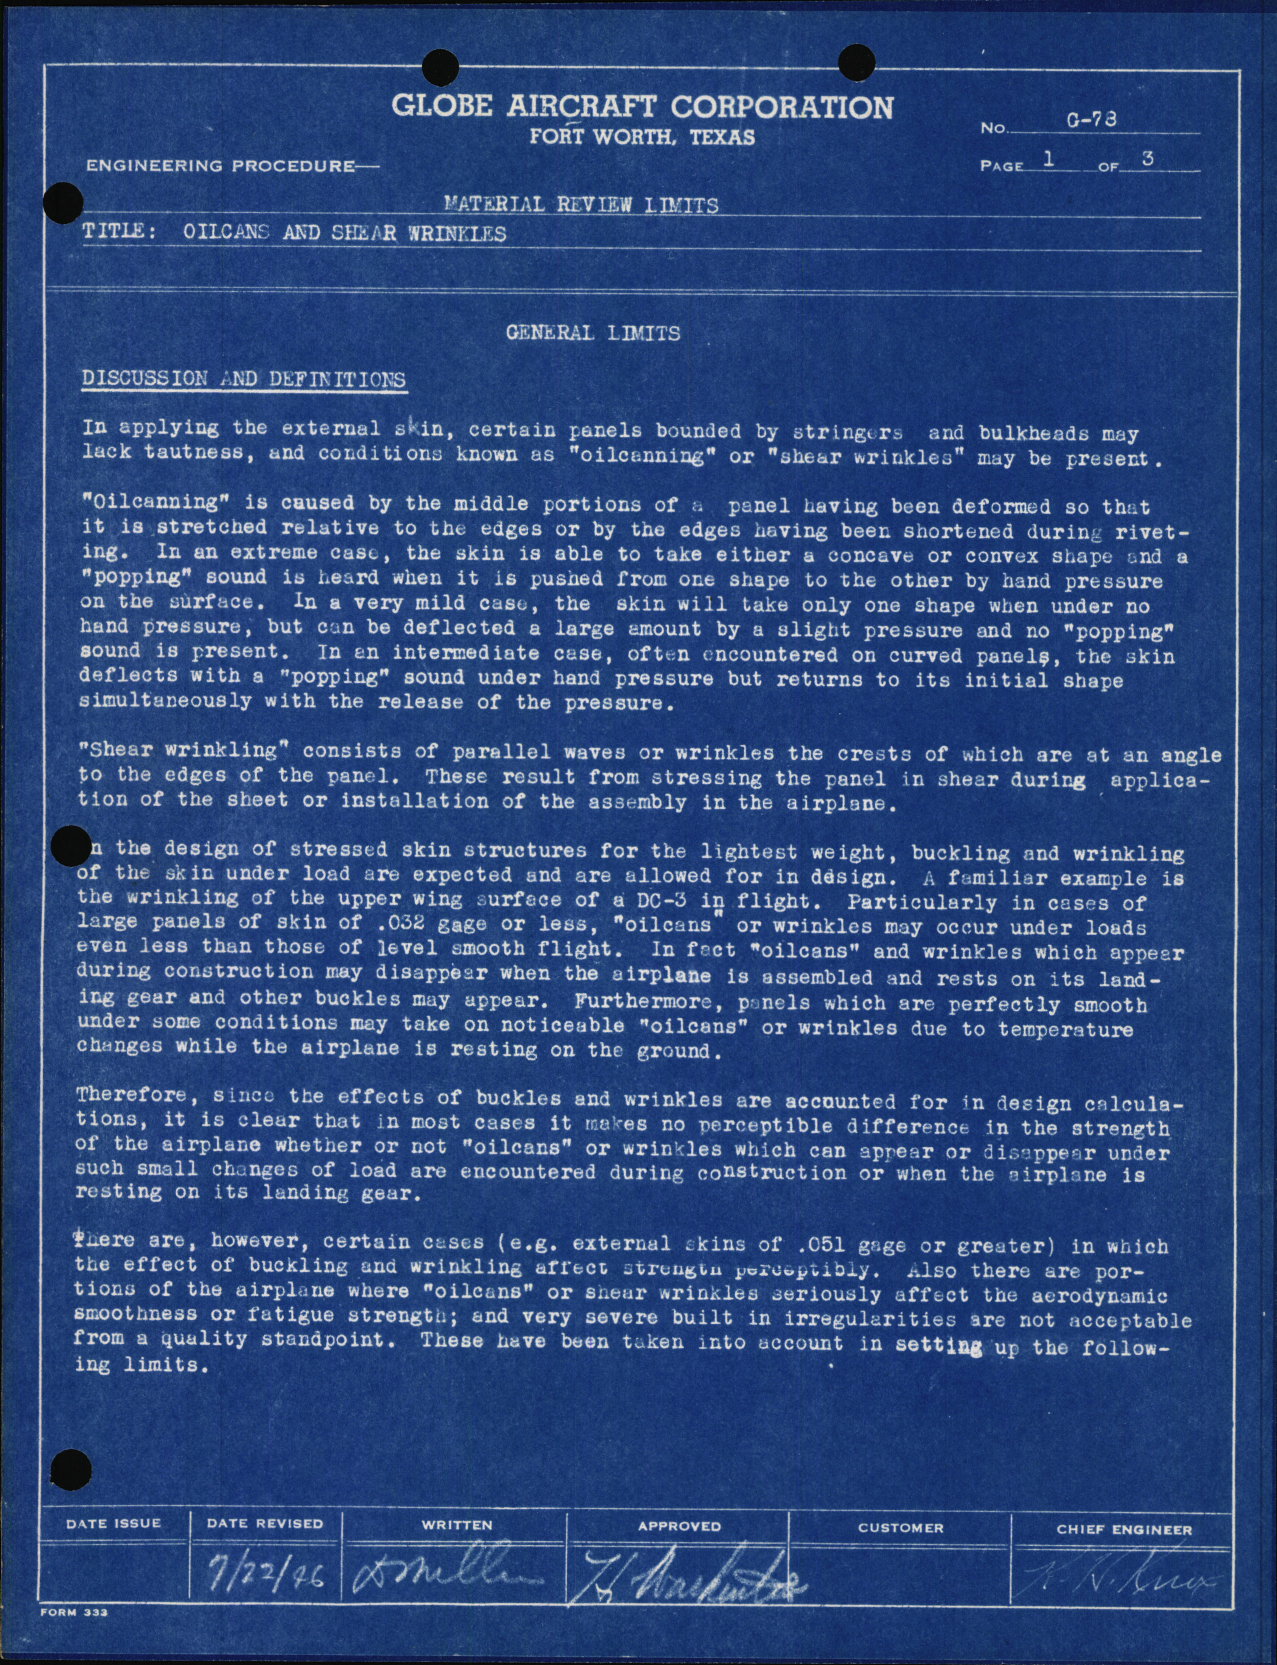 Sample page 4 from AirCorps Library document: Material Review Limits